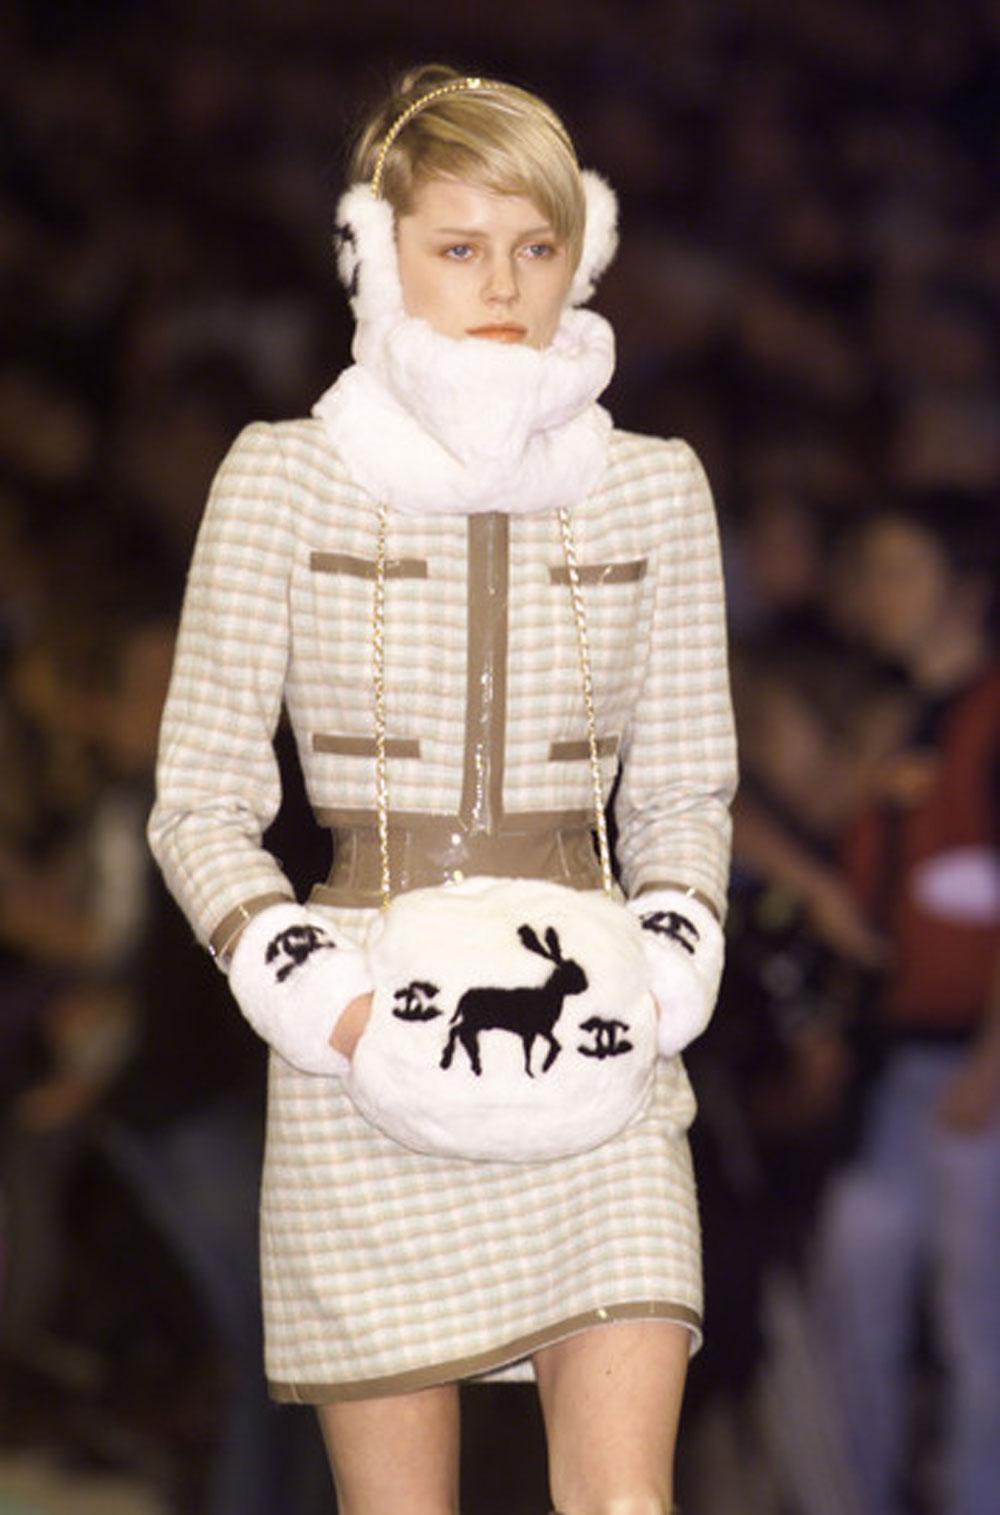 Chanel' White CC Reindeer Rabbit Muff

2001 {VINTAGE 21 Years}
CC Logo with reindeer
Gold hardware
Detachable brushed-gold interwoven chain
White rabbit fur
Filled with down
Black satin lining
Chain drop: 19